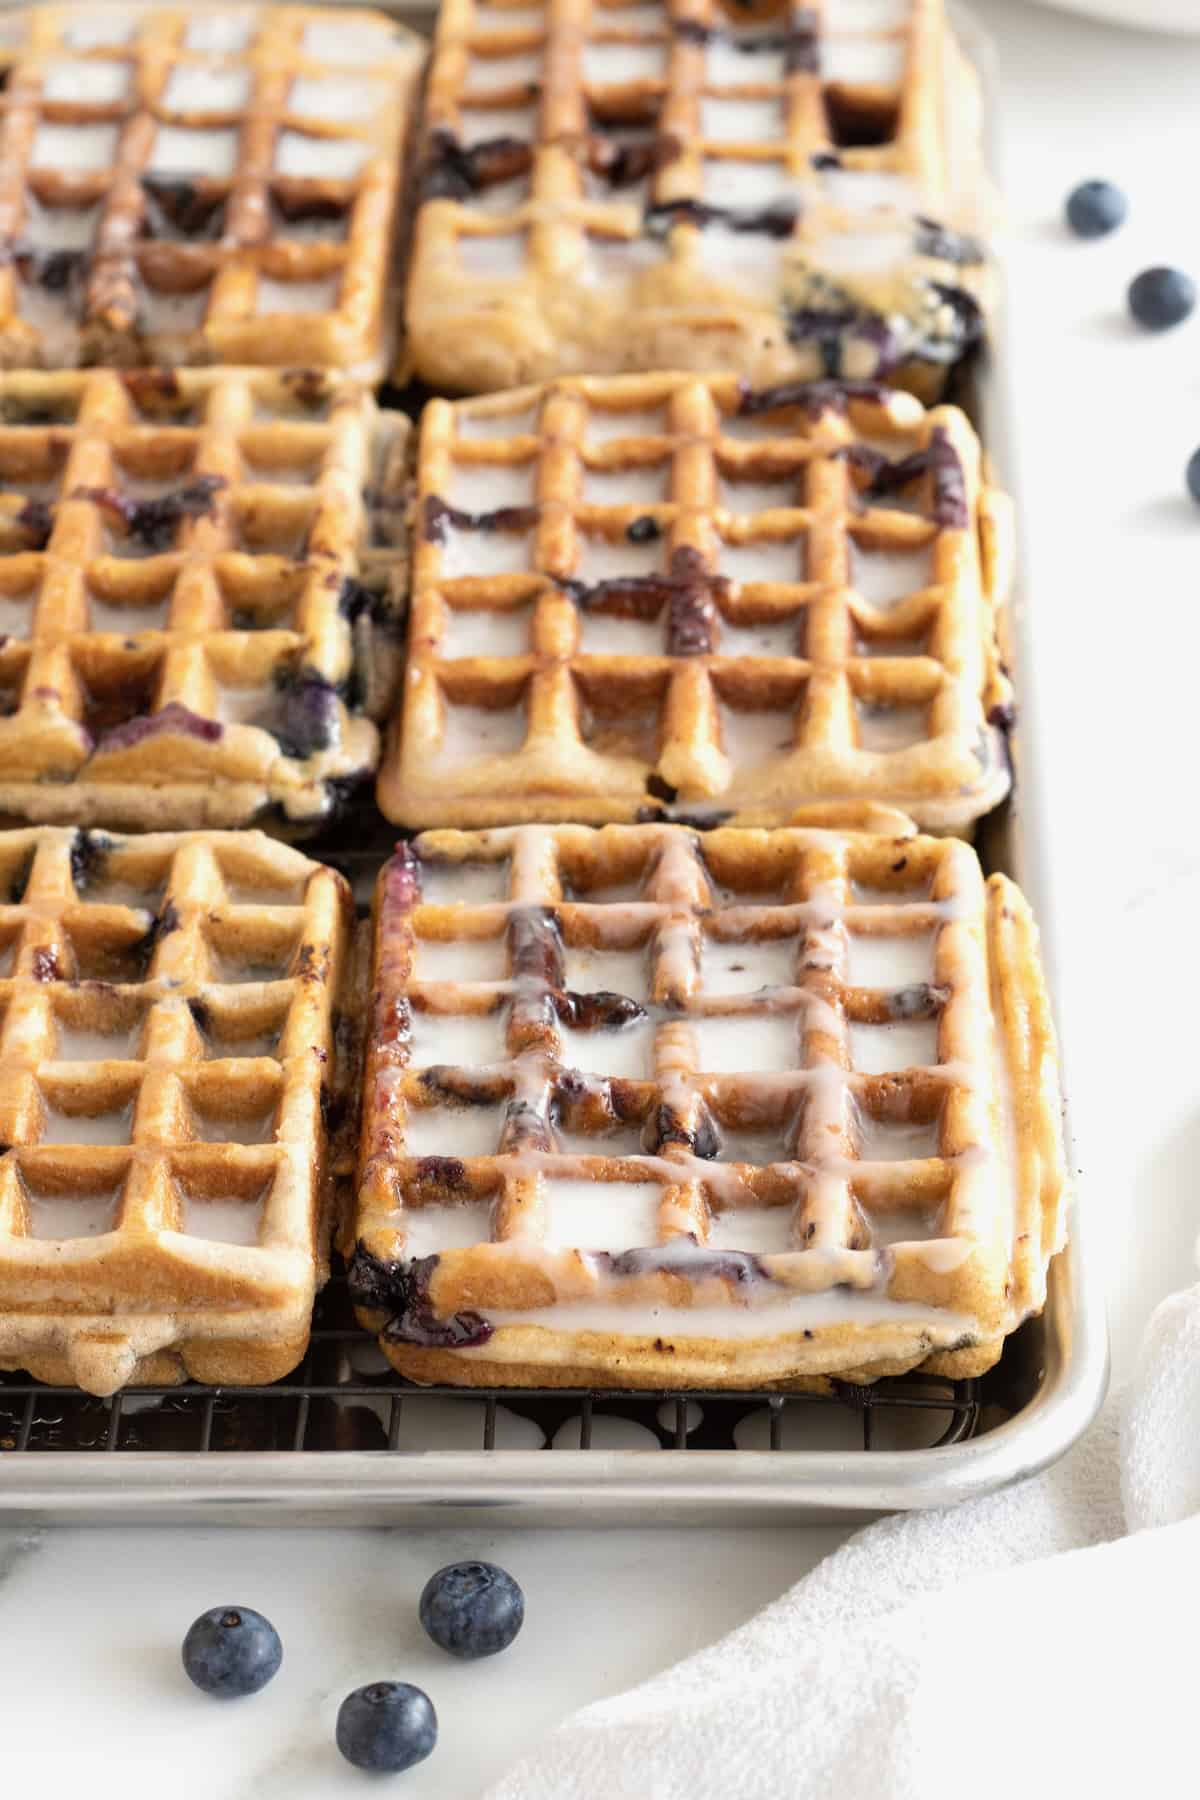 Six blueberry waffles on an aluminum rimmed baking sheet. The waffles have a white glaze on them.